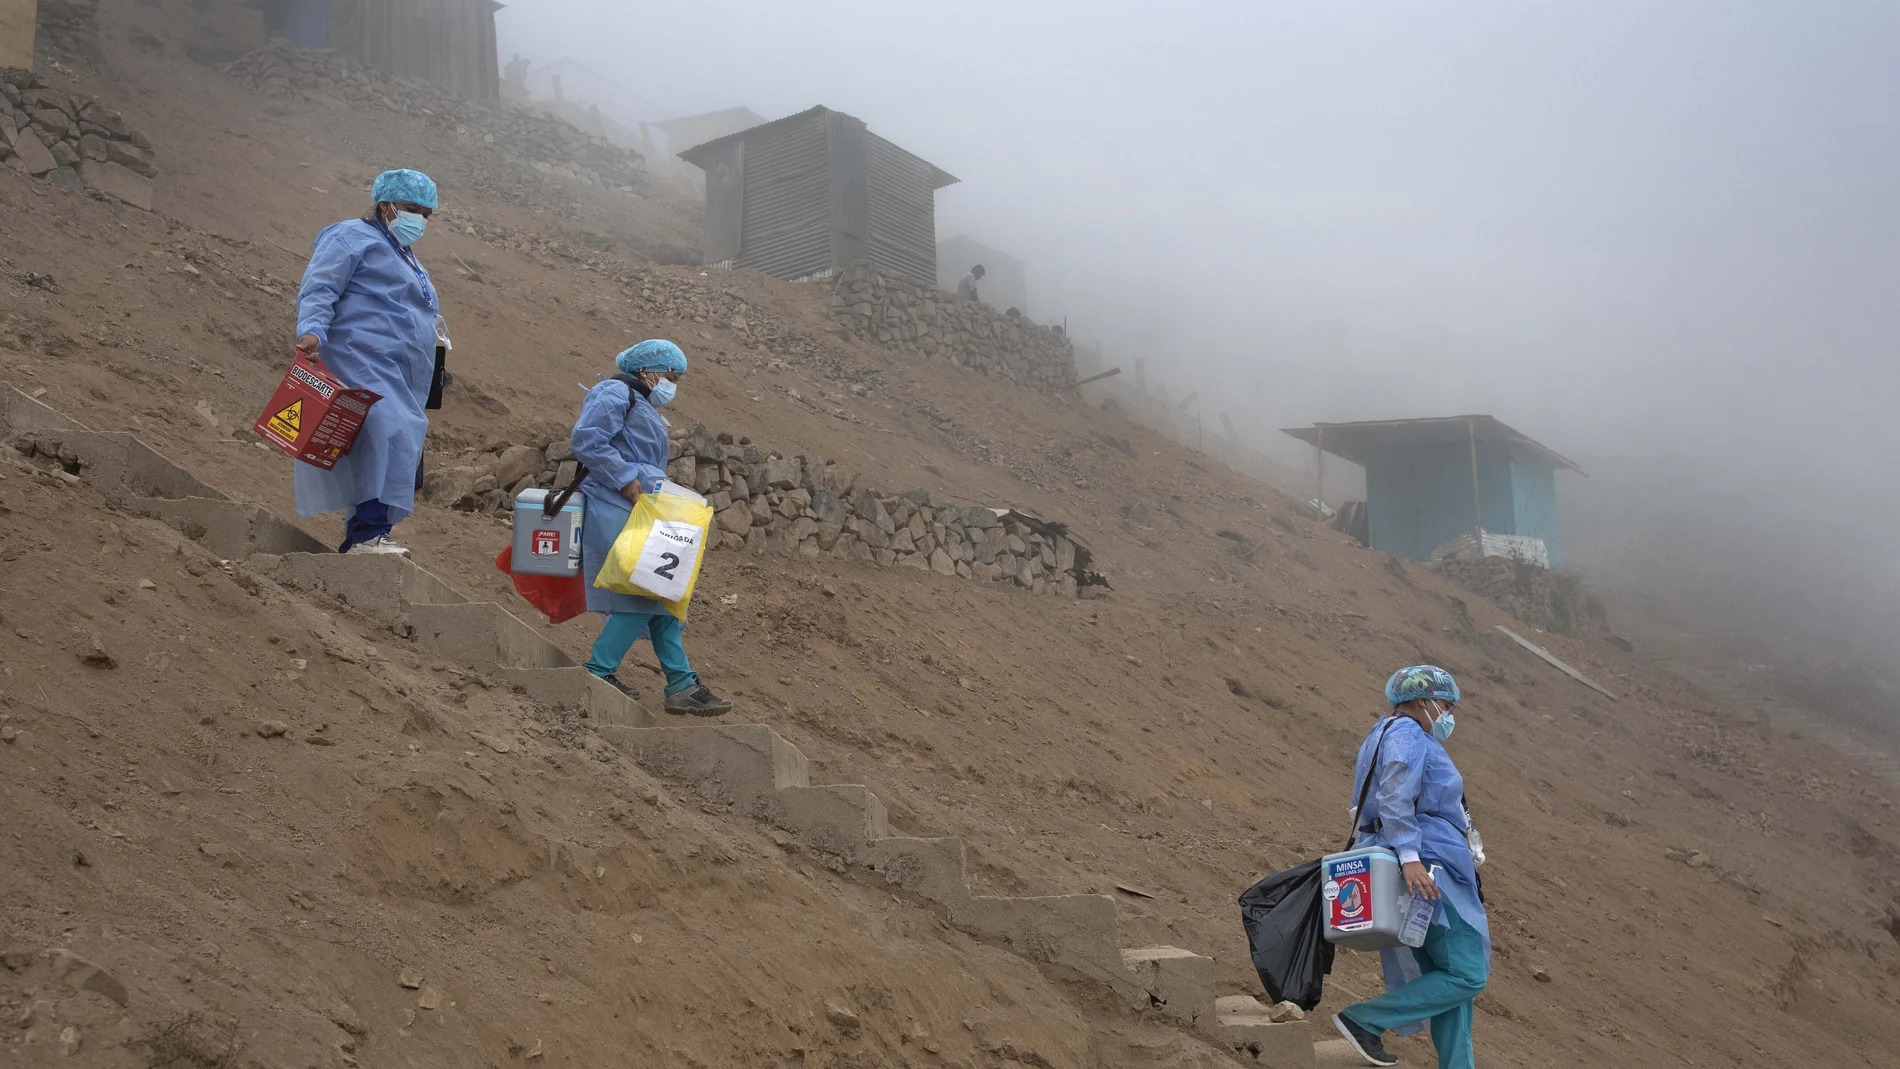 FILE - Healthcare workers carry coolers filled with doses of the Pfizer COVID-19 vaccine during a door-to-door vaccination campaign in the Villa Maria del Triunfo district on the outskirts of Lima, Peru, Nov. 16, 2021. Peru confirmed on Tuesday, Jan. 4, 2022, the start of a third wave of new coronavirus infections. (AP Photo/Guadalupe Pardo, File)